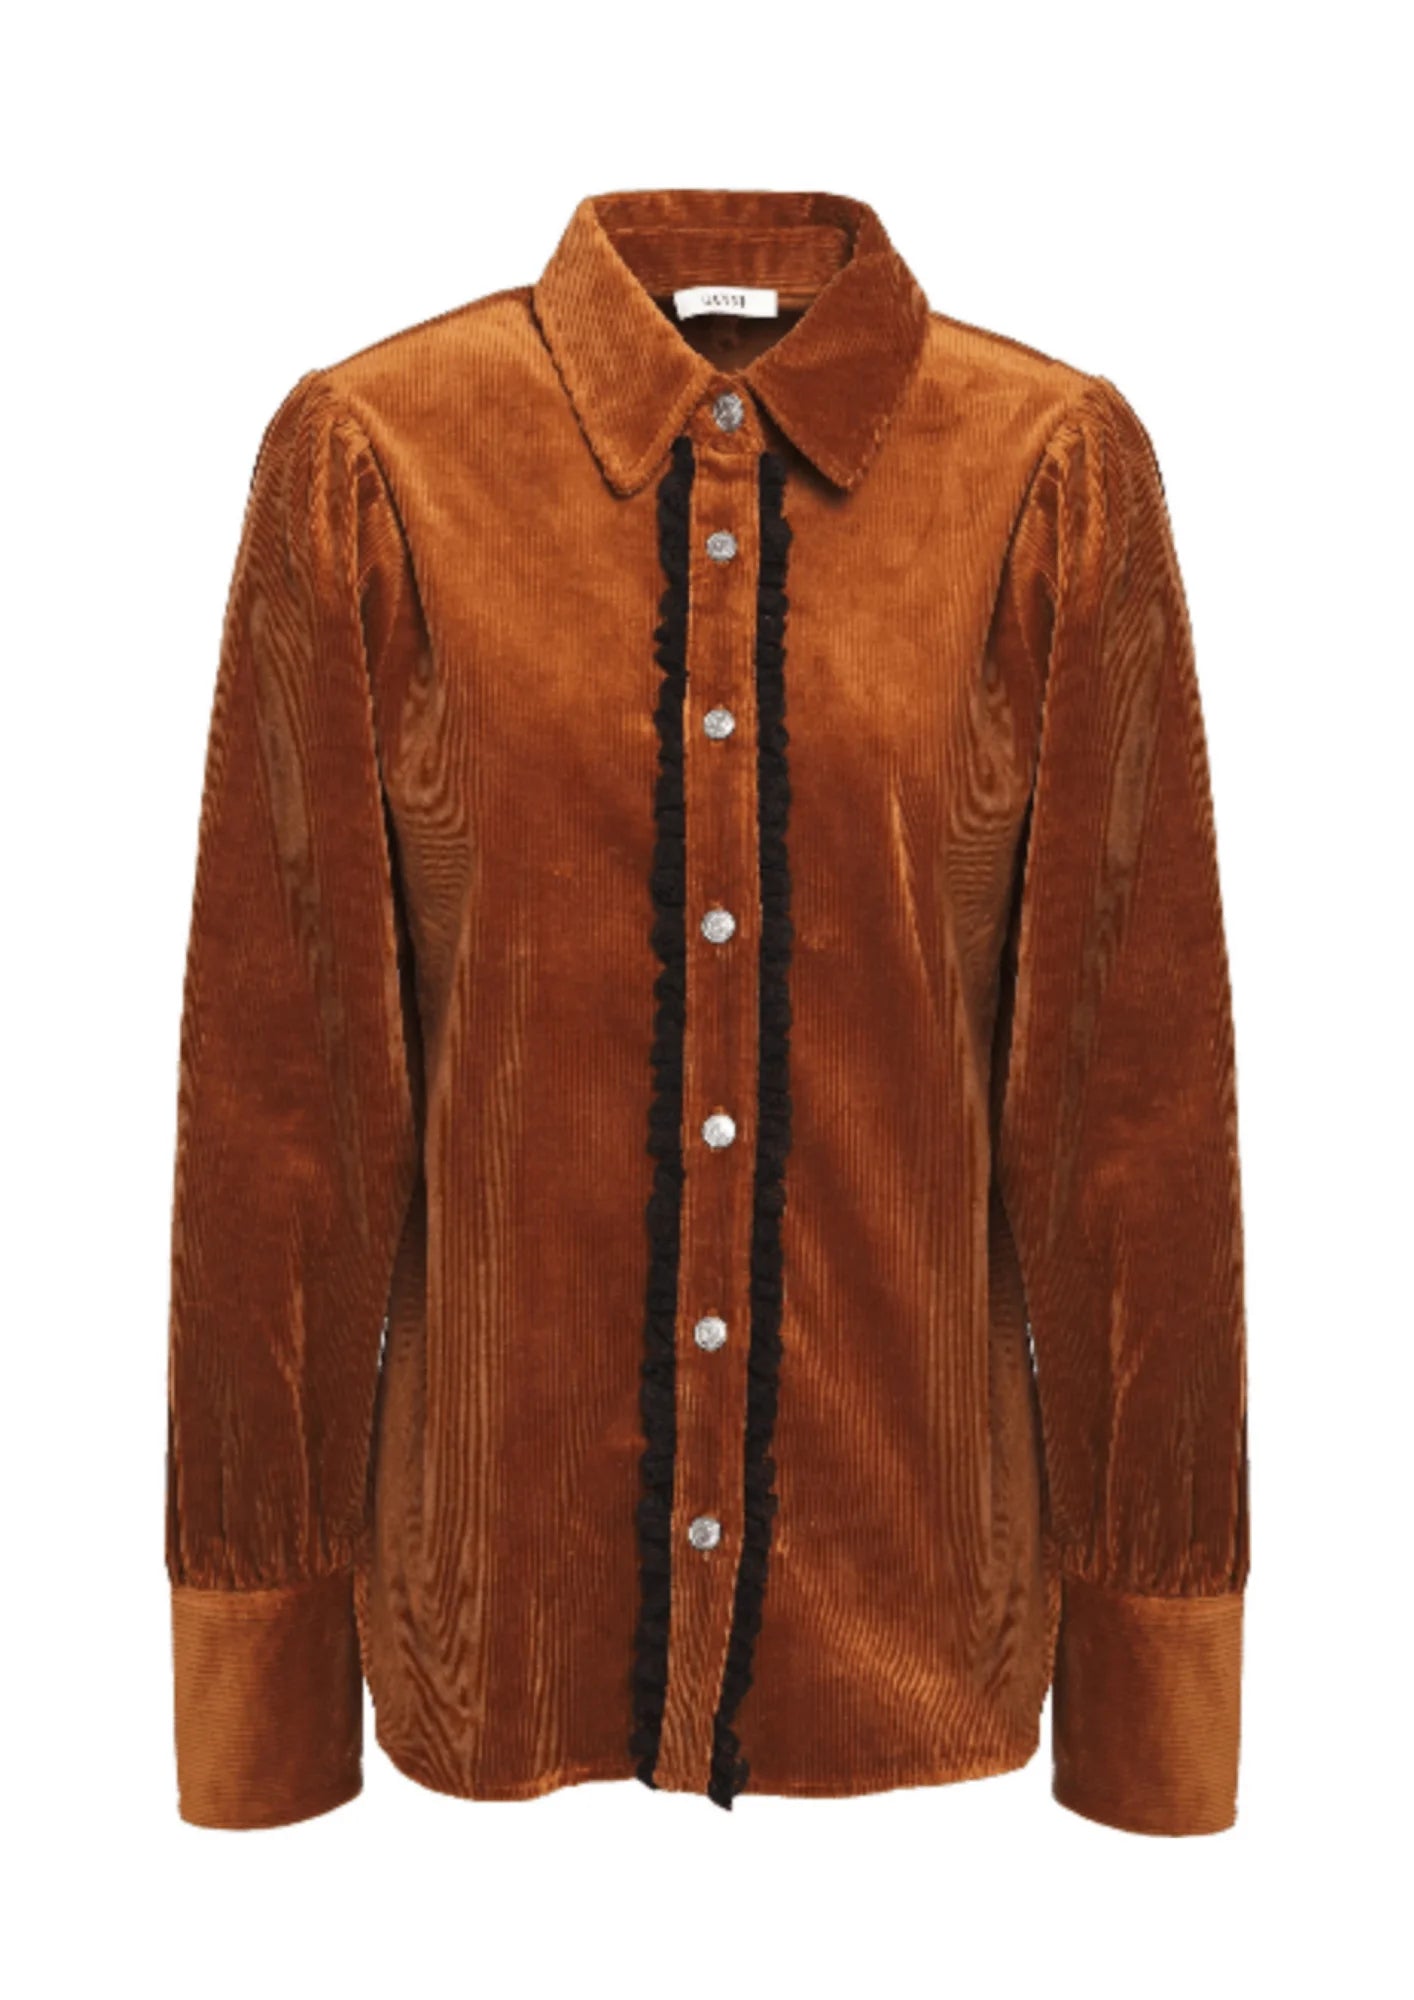 BROWN LACE-TRIMMED CORDUROY SHIRT